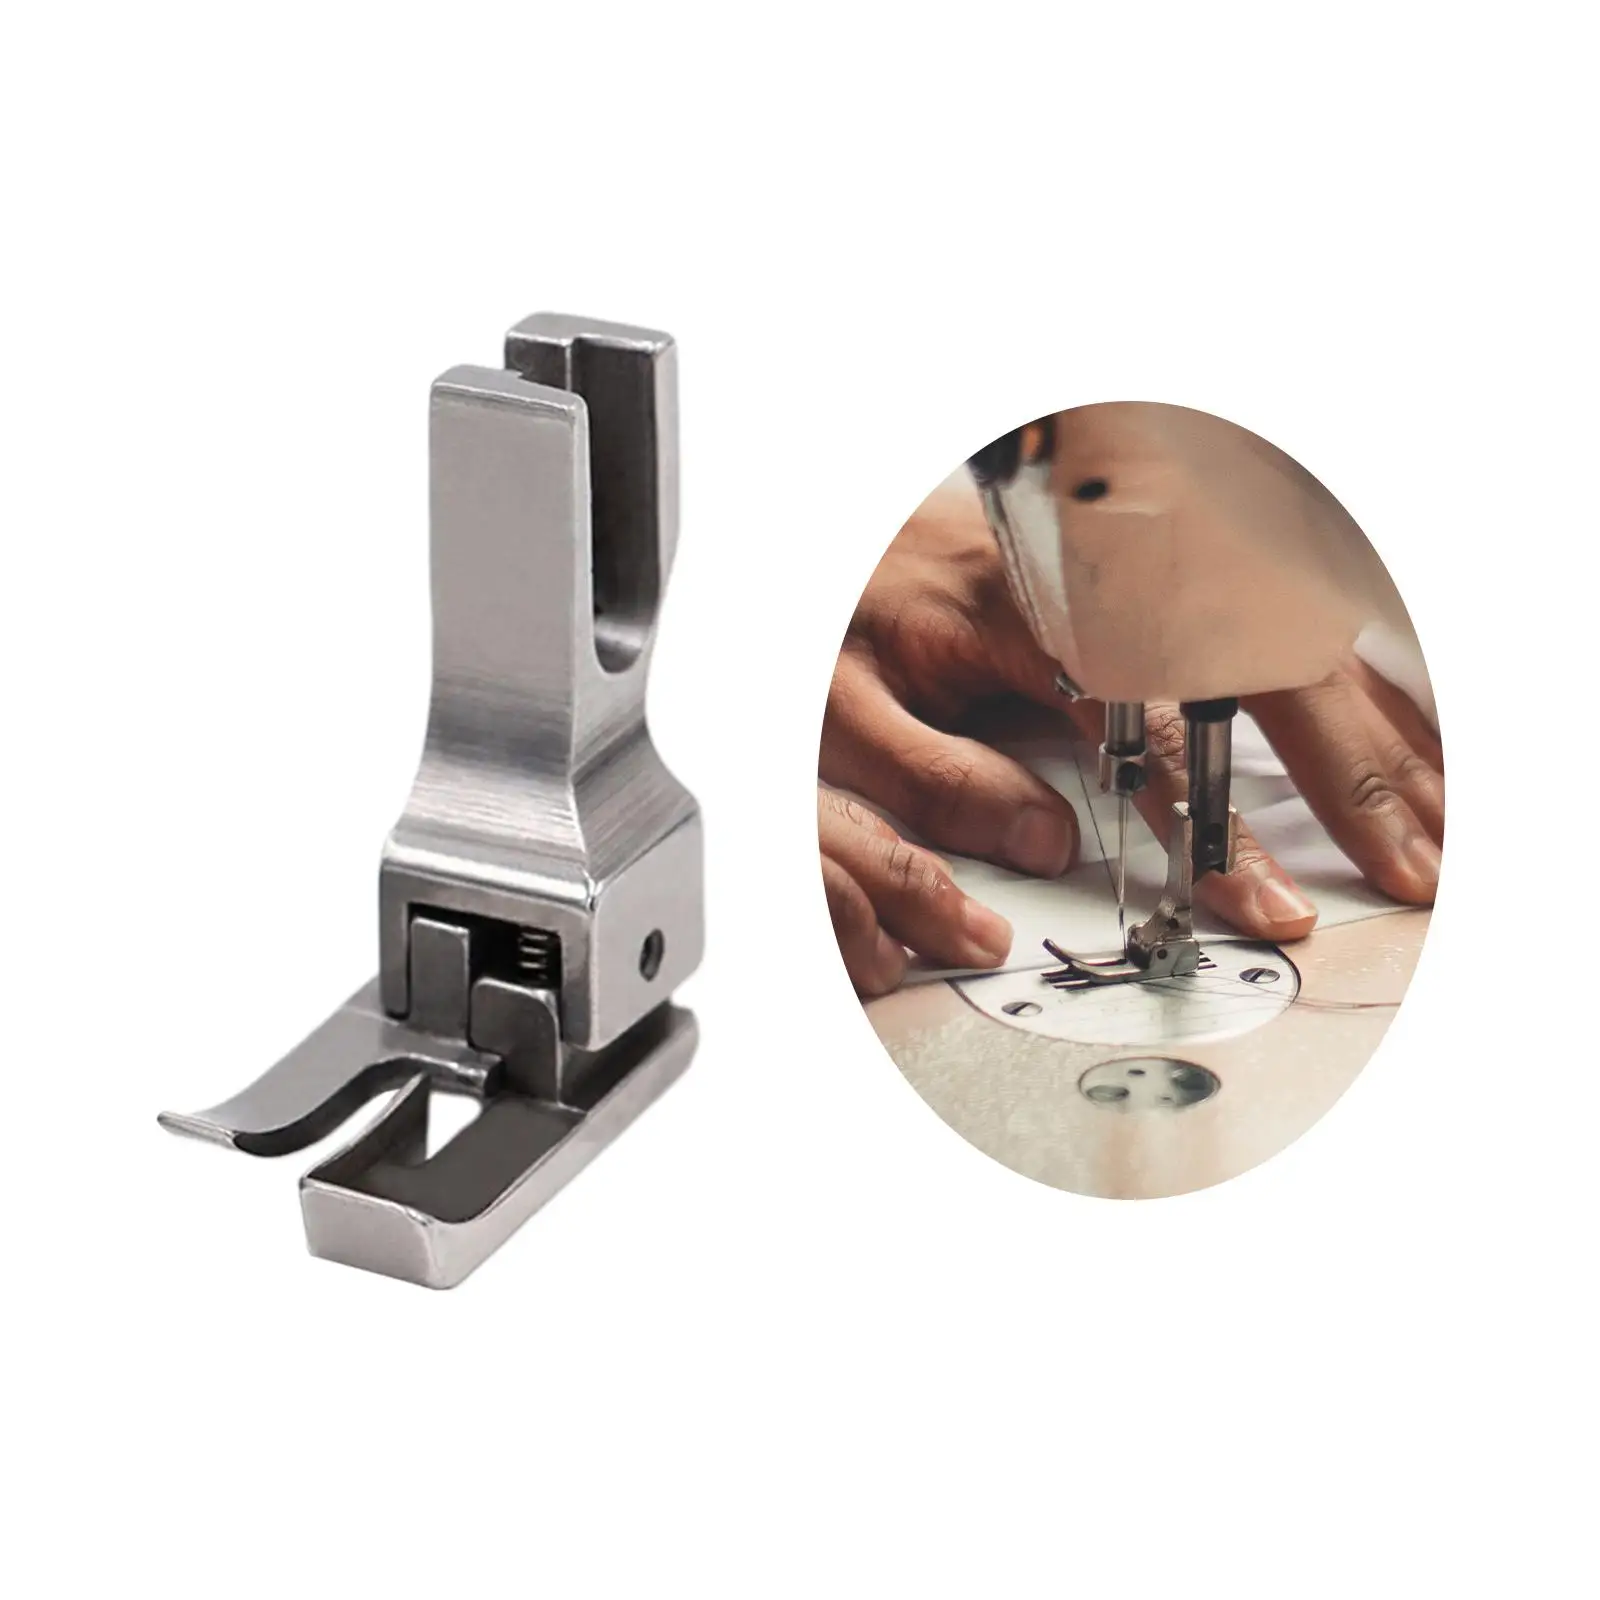 Sewing Machine Presser Foot Straight Stitch Presser Foot for Leather Crafts DIY Arts Crafts Embroidery Machine Sewing Apparel